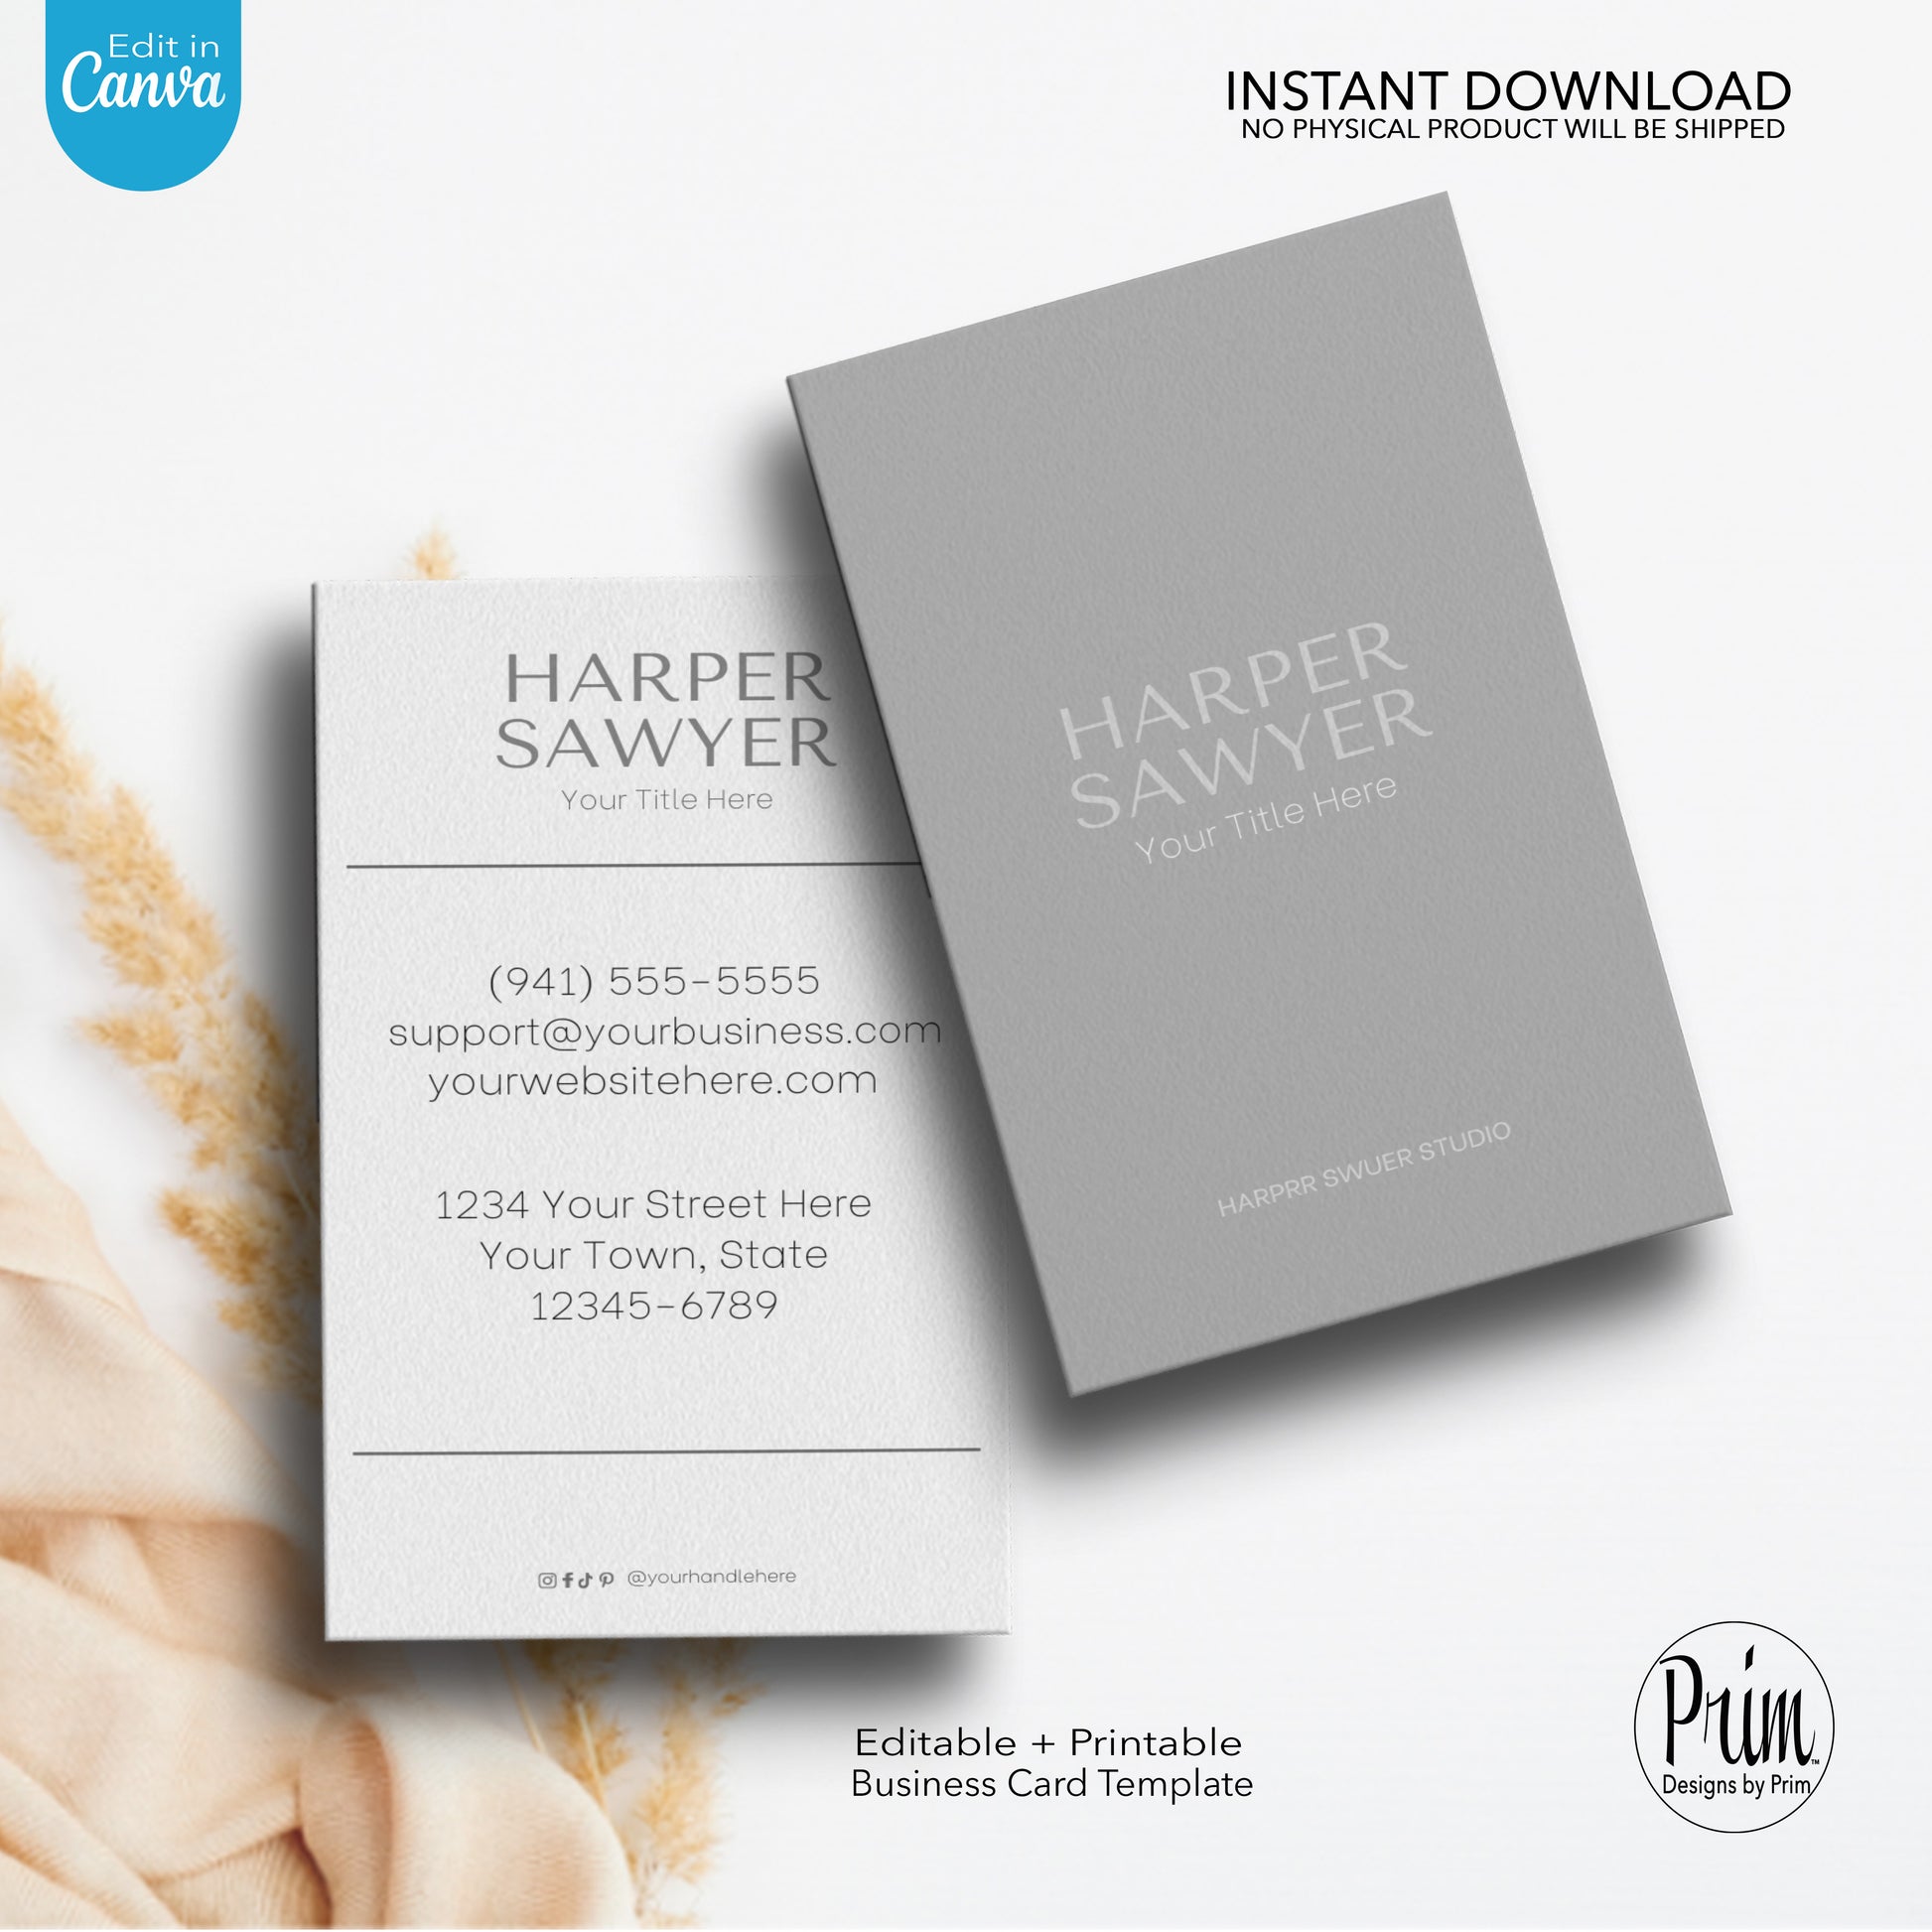 Designs by Prim Designs by Prim Simply Modern Business Card | Editable Business Card | Health Beauty Hair Business Template | Design Studio Card | Realtor Card Template